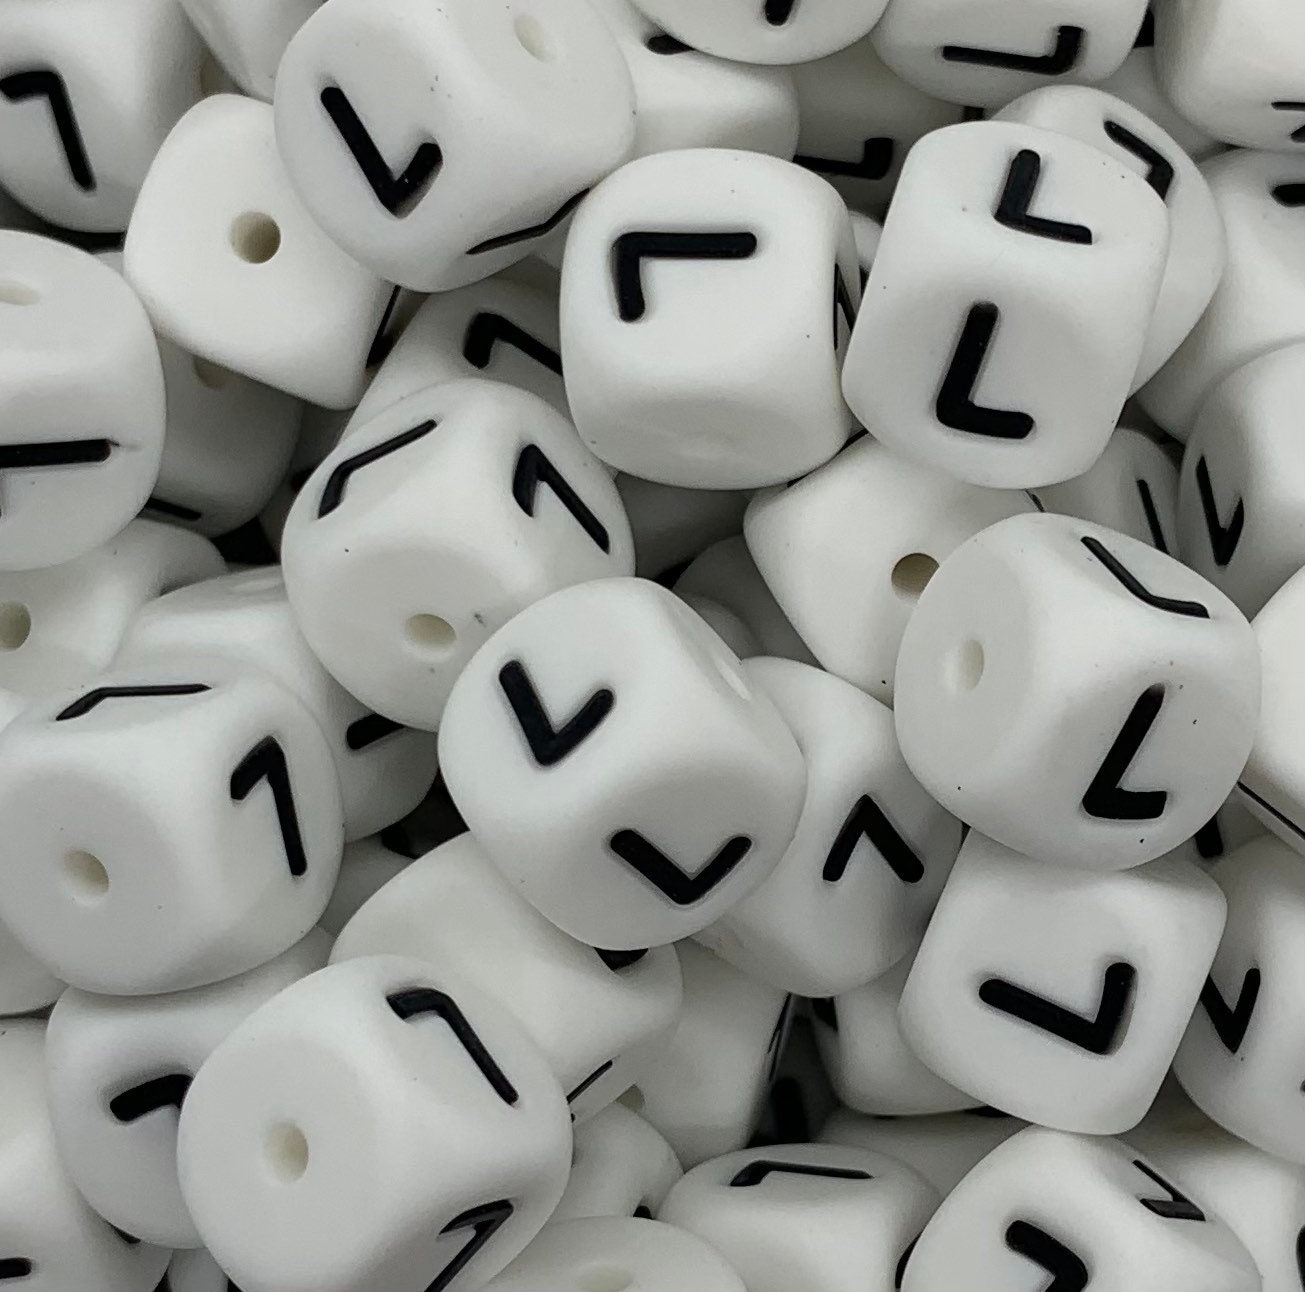  144 Pcs Silicone Letter Number Beads 12mm - Cube Sorted Square Letter  Beads - Square Alphabet Beads : Arts, Crafts & Sewing